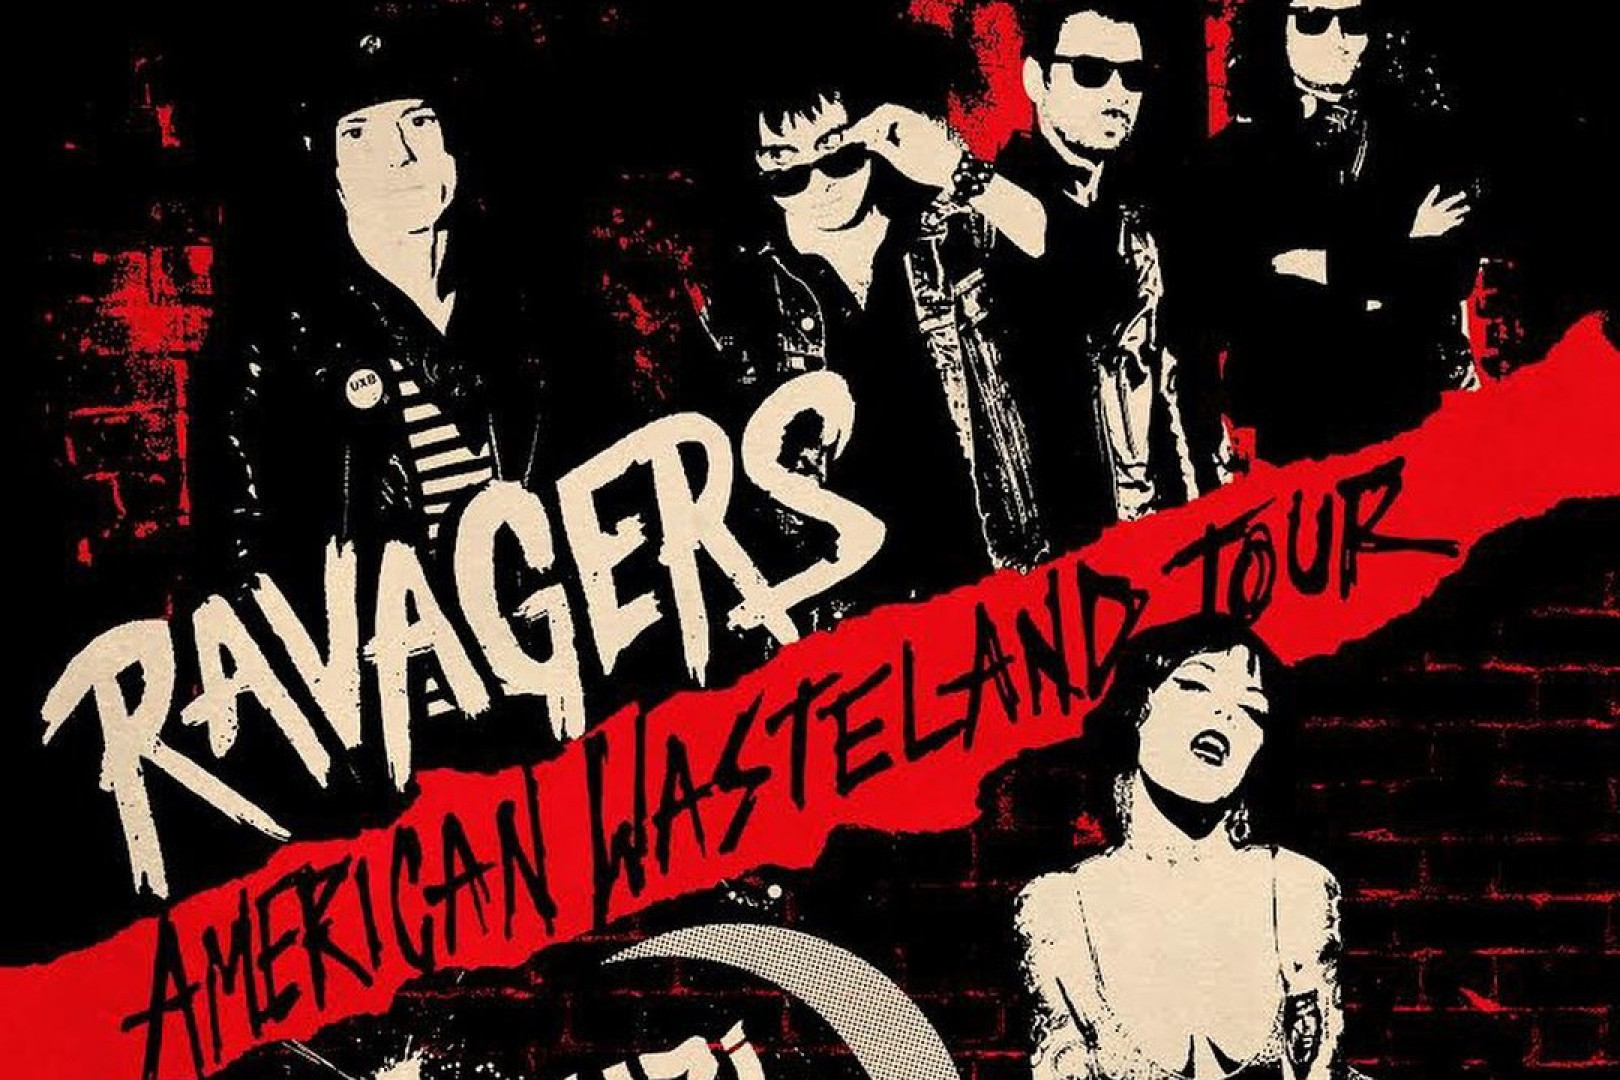 Ravagers and the Suzi Moon band to tour in Spring